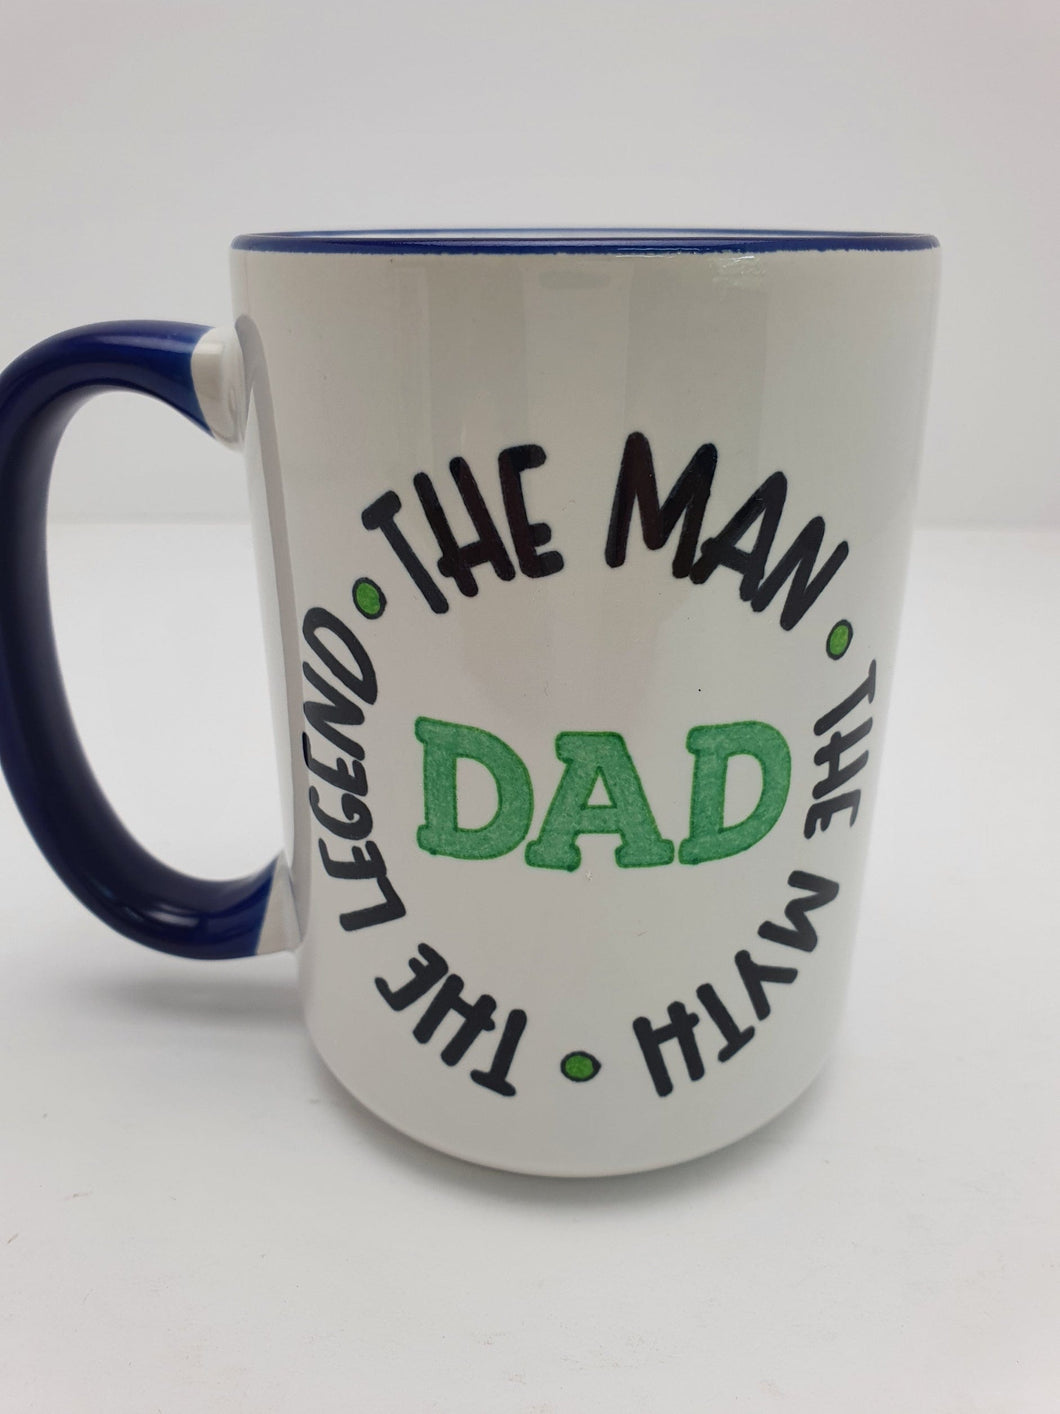 Dad Tea Coffee Mug Father's Day Gift Hand Decorated 15oz Ceramic Blue Handle and Rim Harbourside Gifts